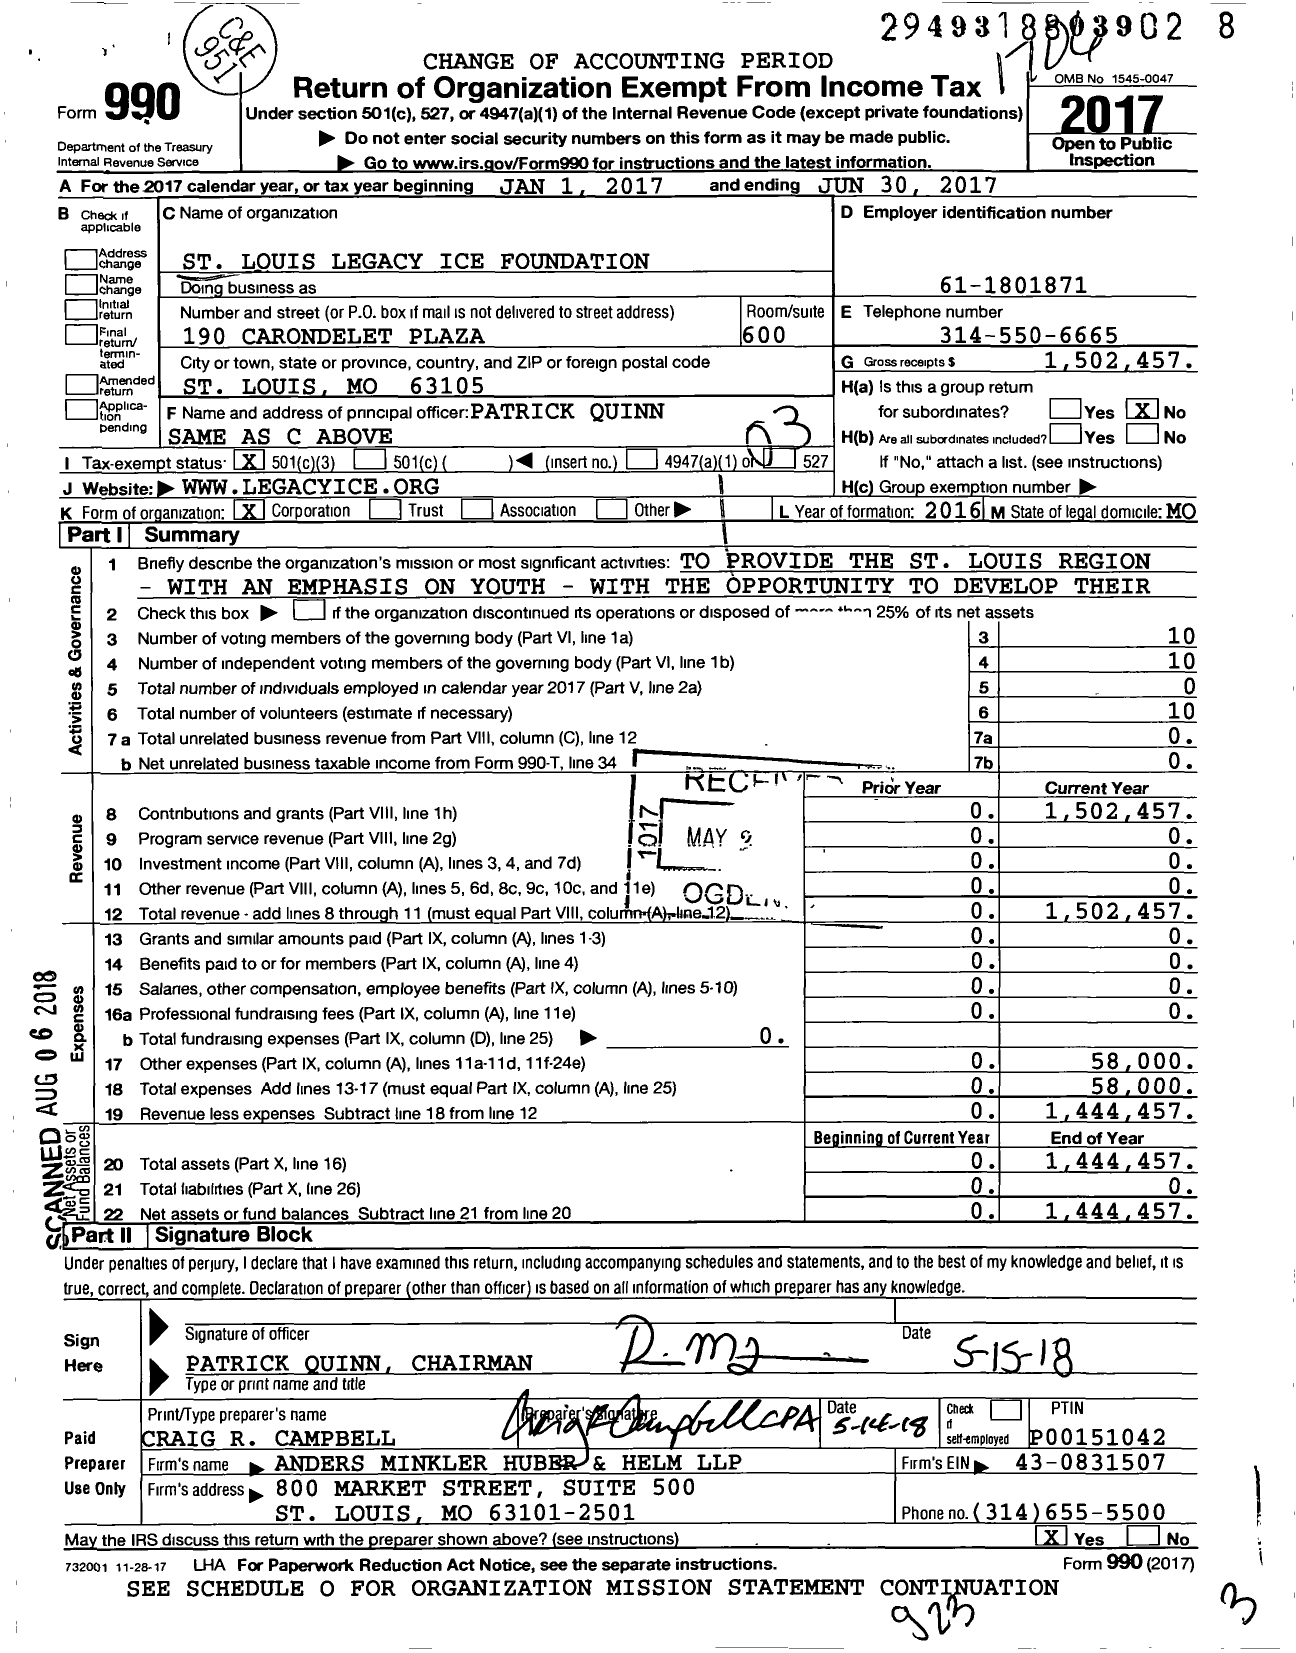 Image of first page of 2016 Form 990 for St Louis Legacy Ice Foundation